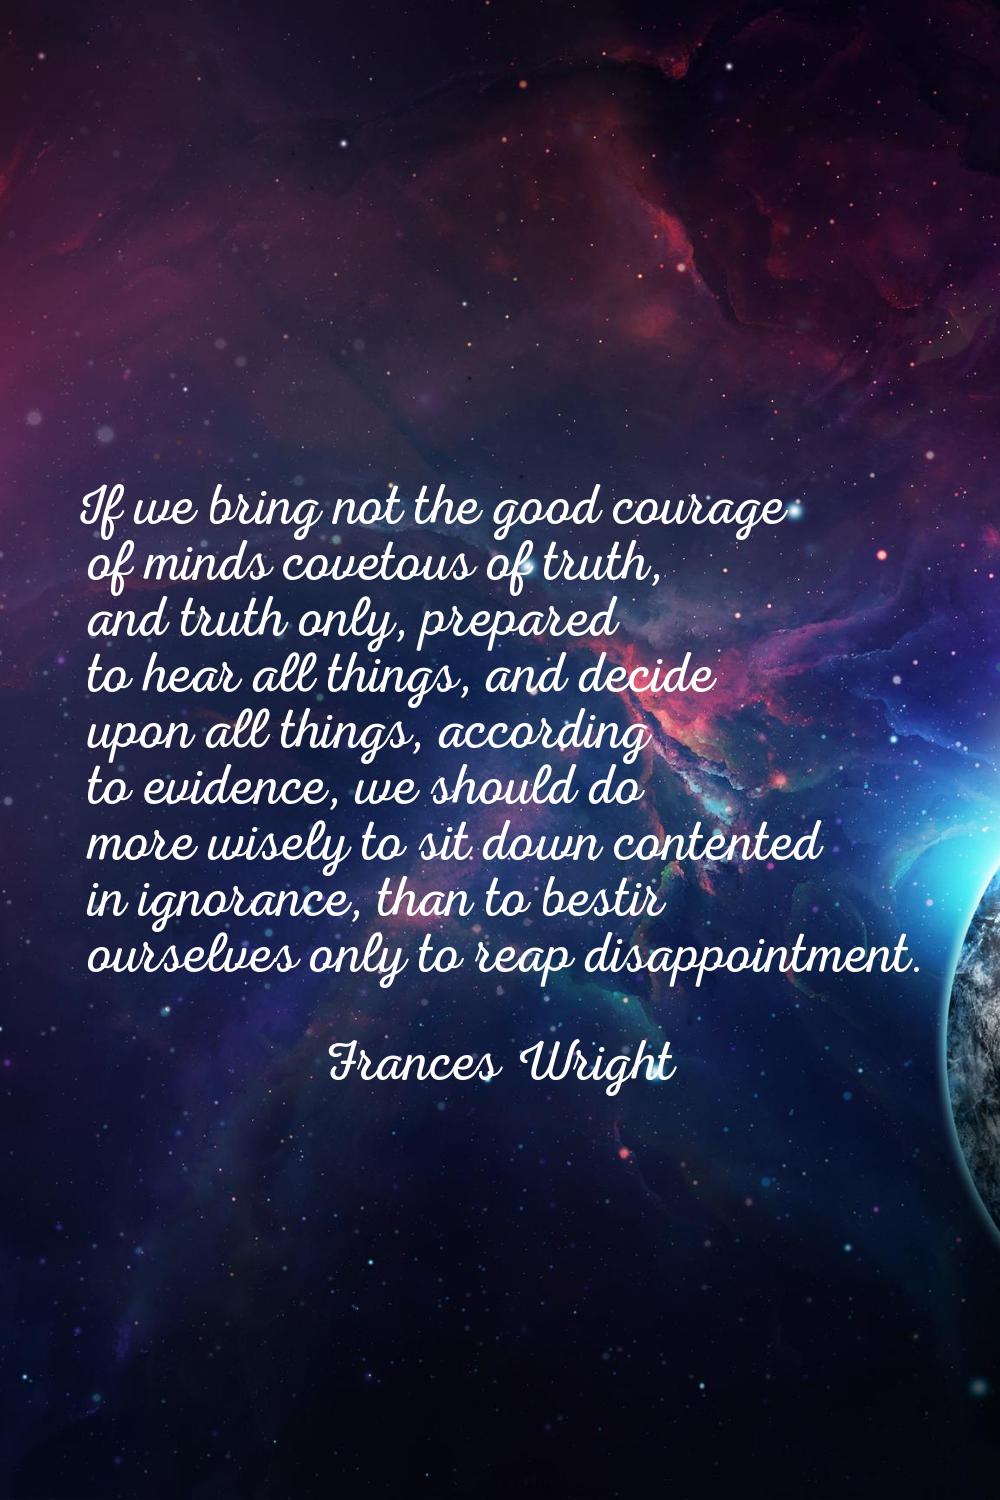 If we bring not the good courage of minds covetous of truth, and truth only, prepared to hear all t